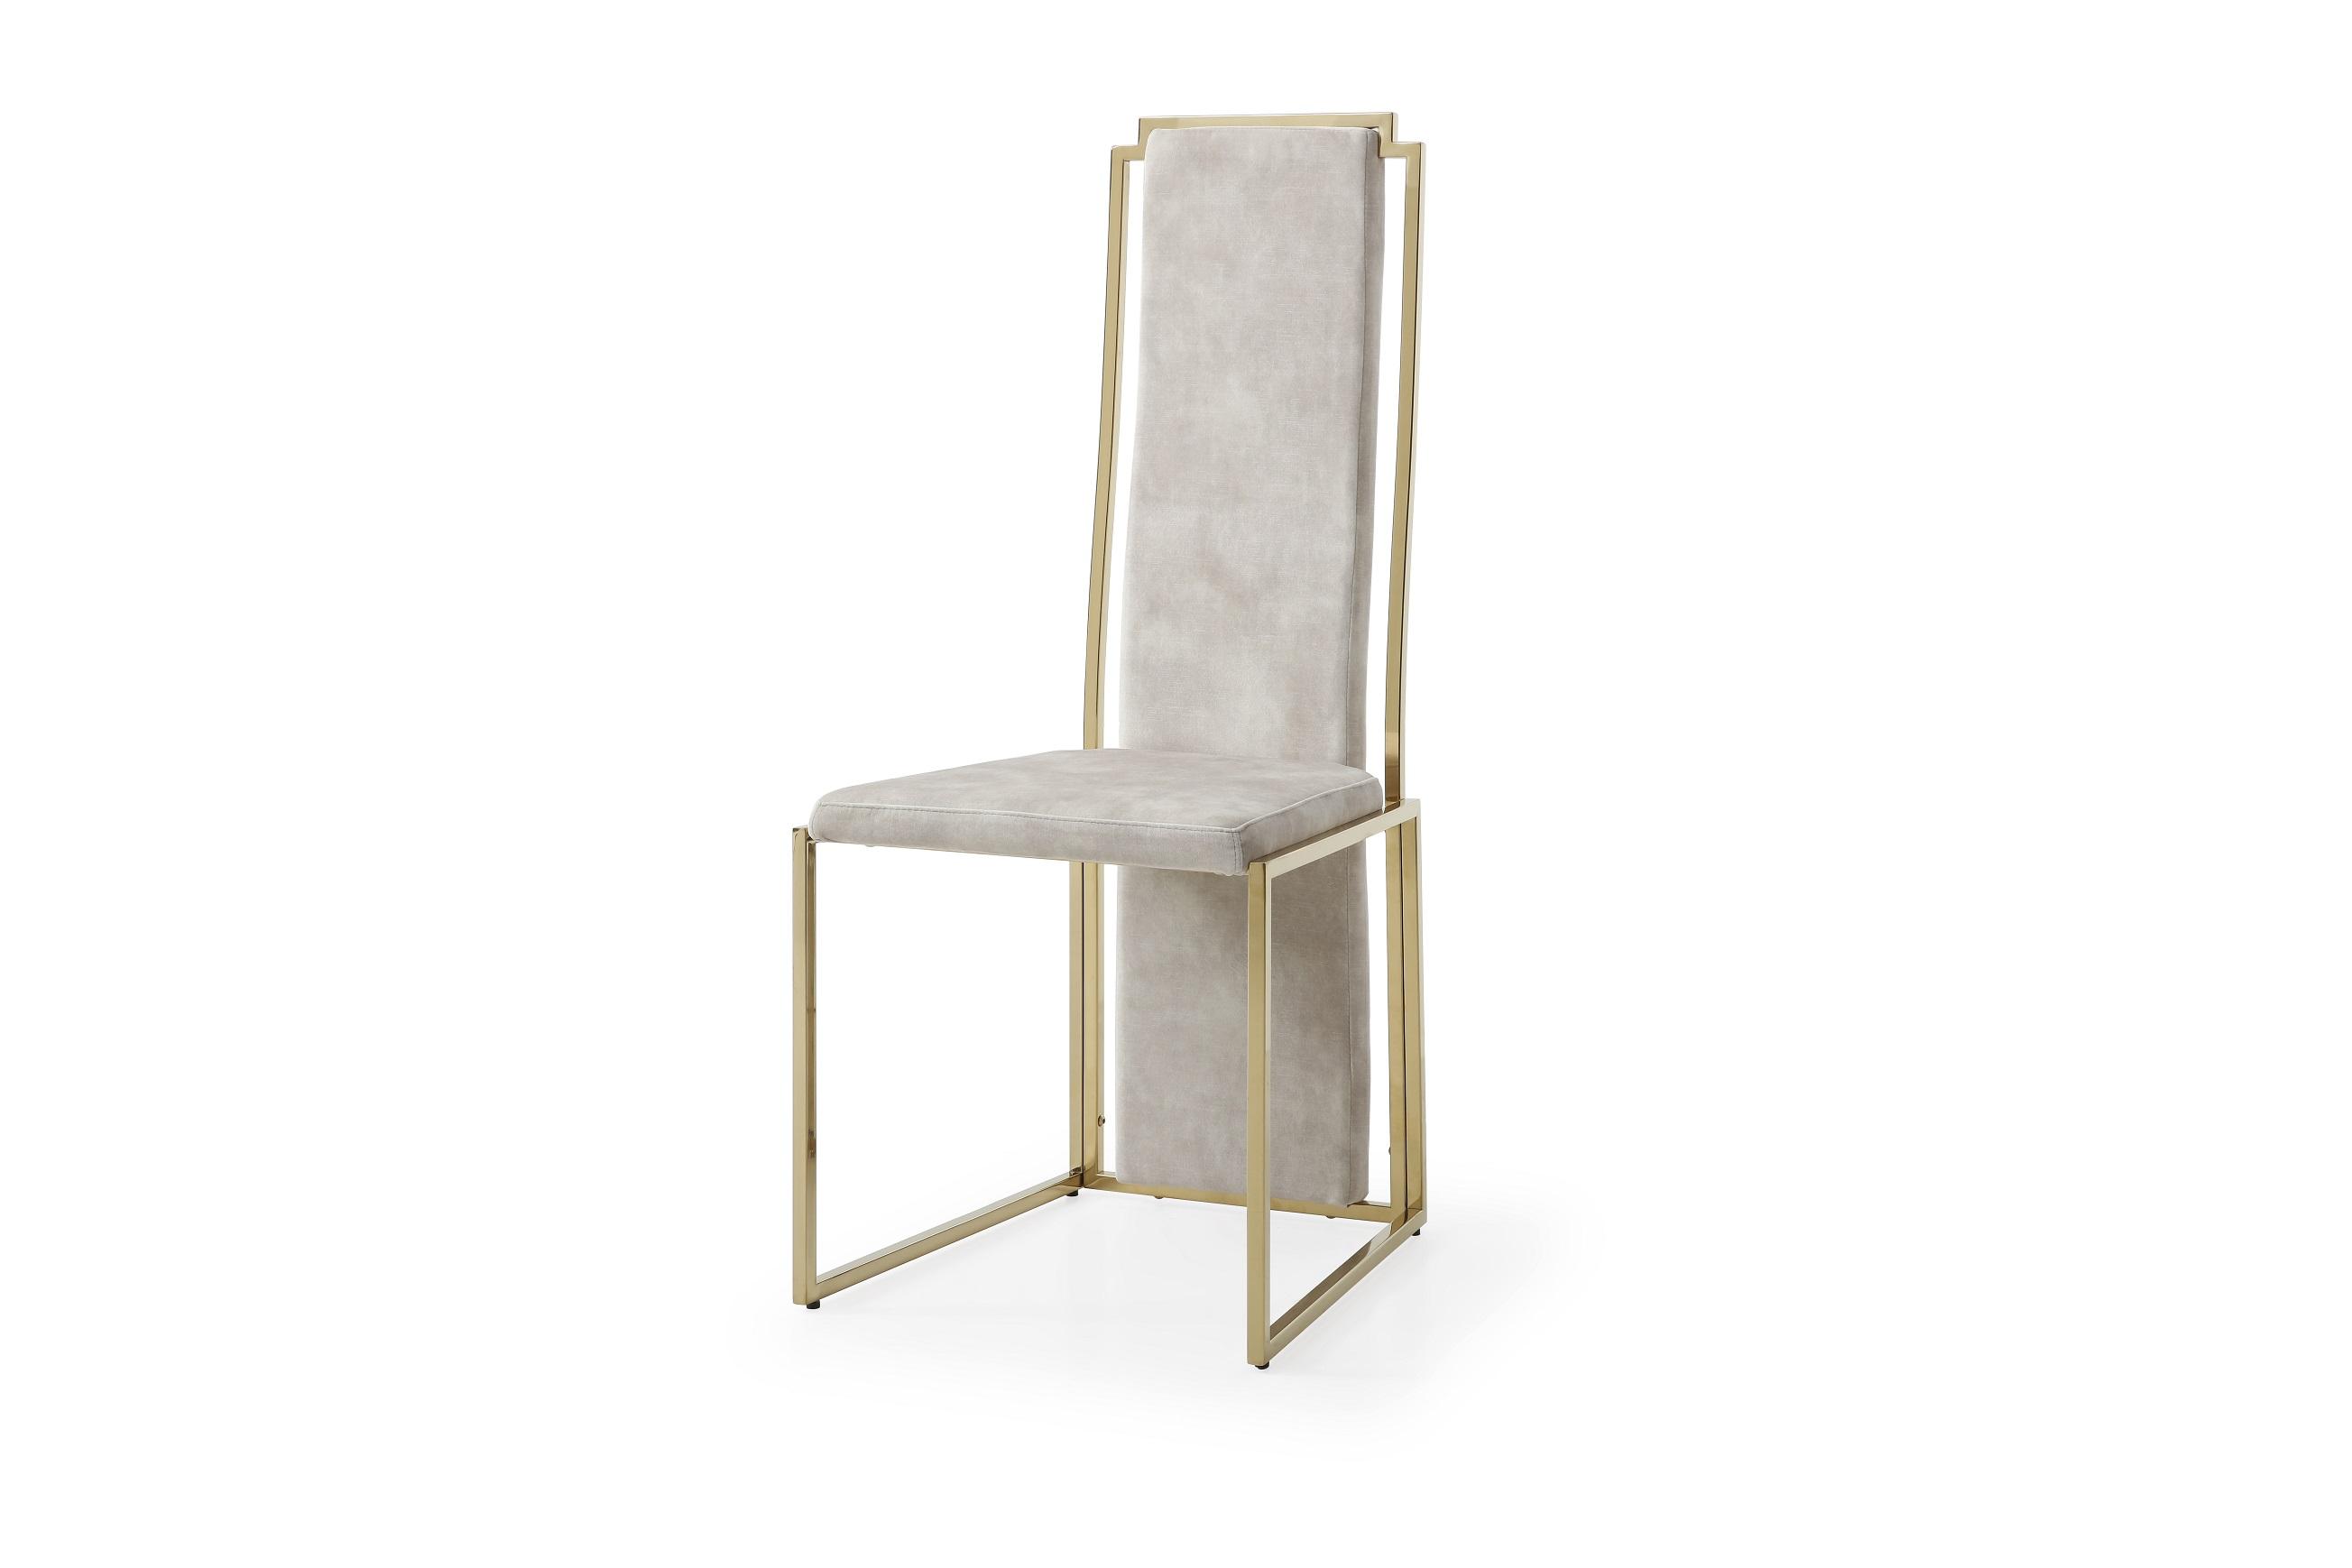 Contemporary Dining Chair Set DC1658F-BEI Sumo DC1658F-BEI in Gold, Beige Suede